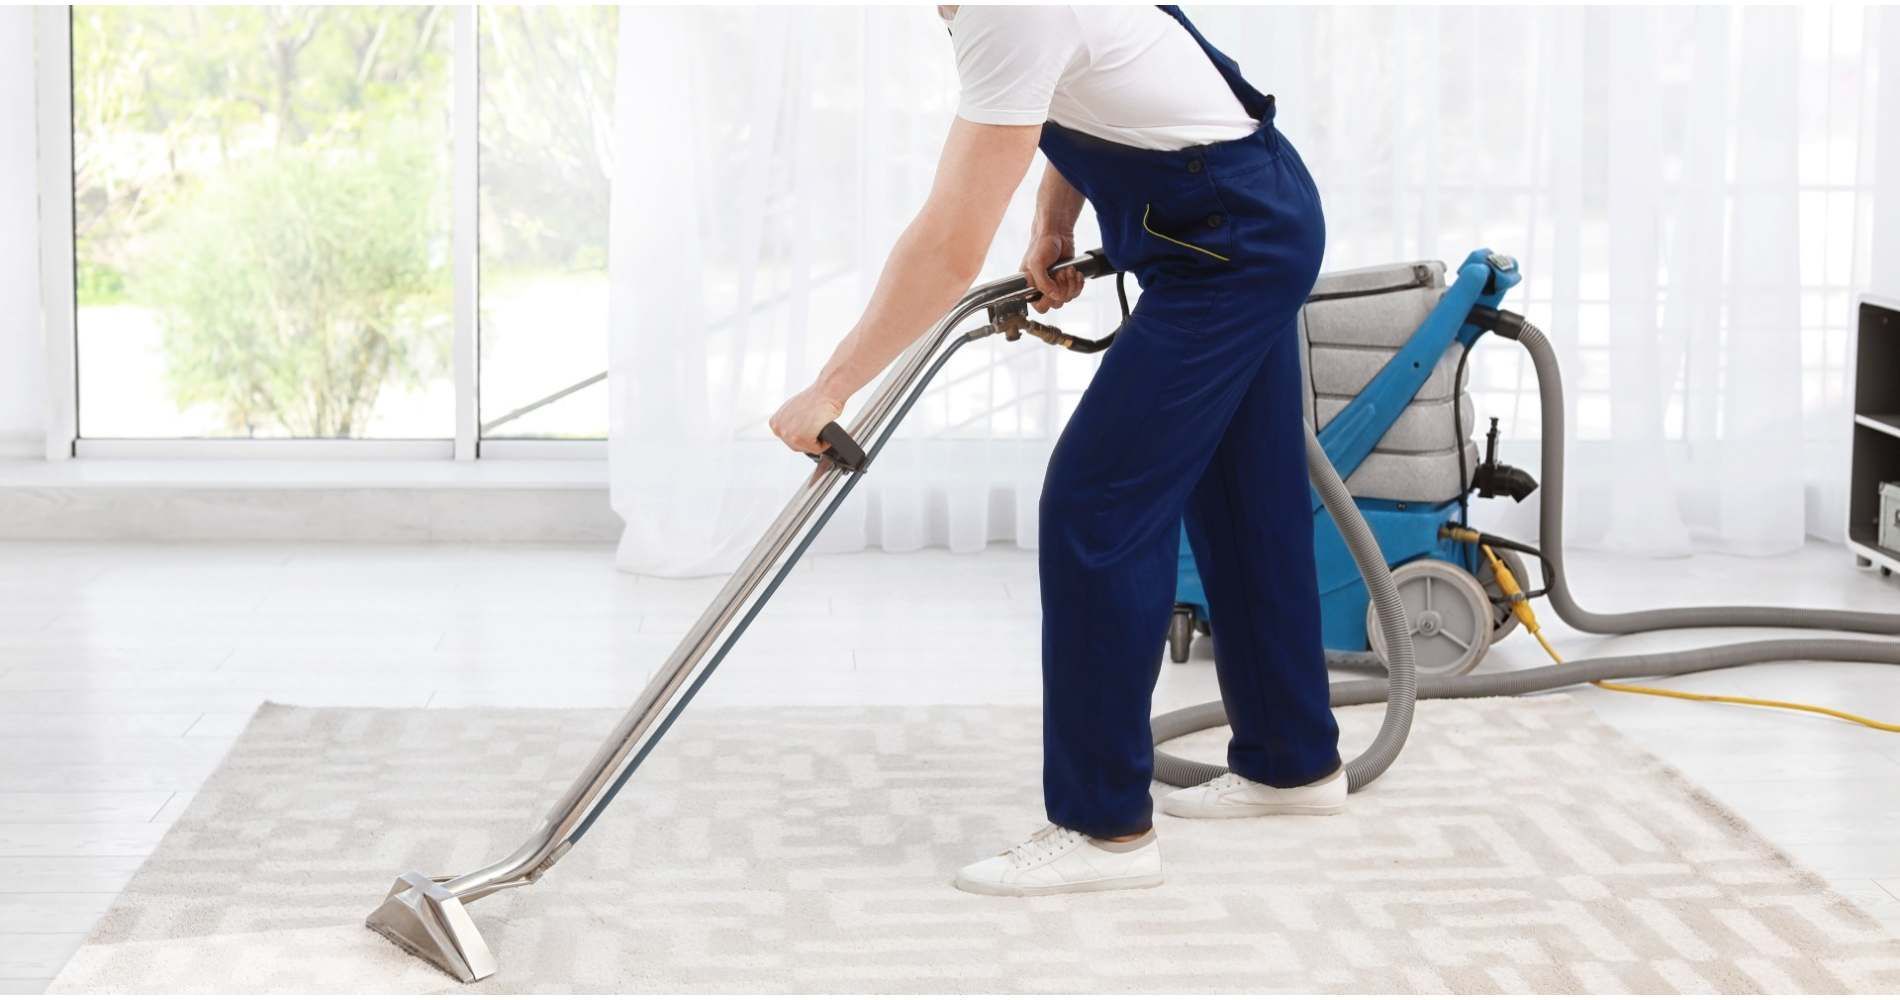 How To Care For Your Carpet Once It’s Been Cleaned